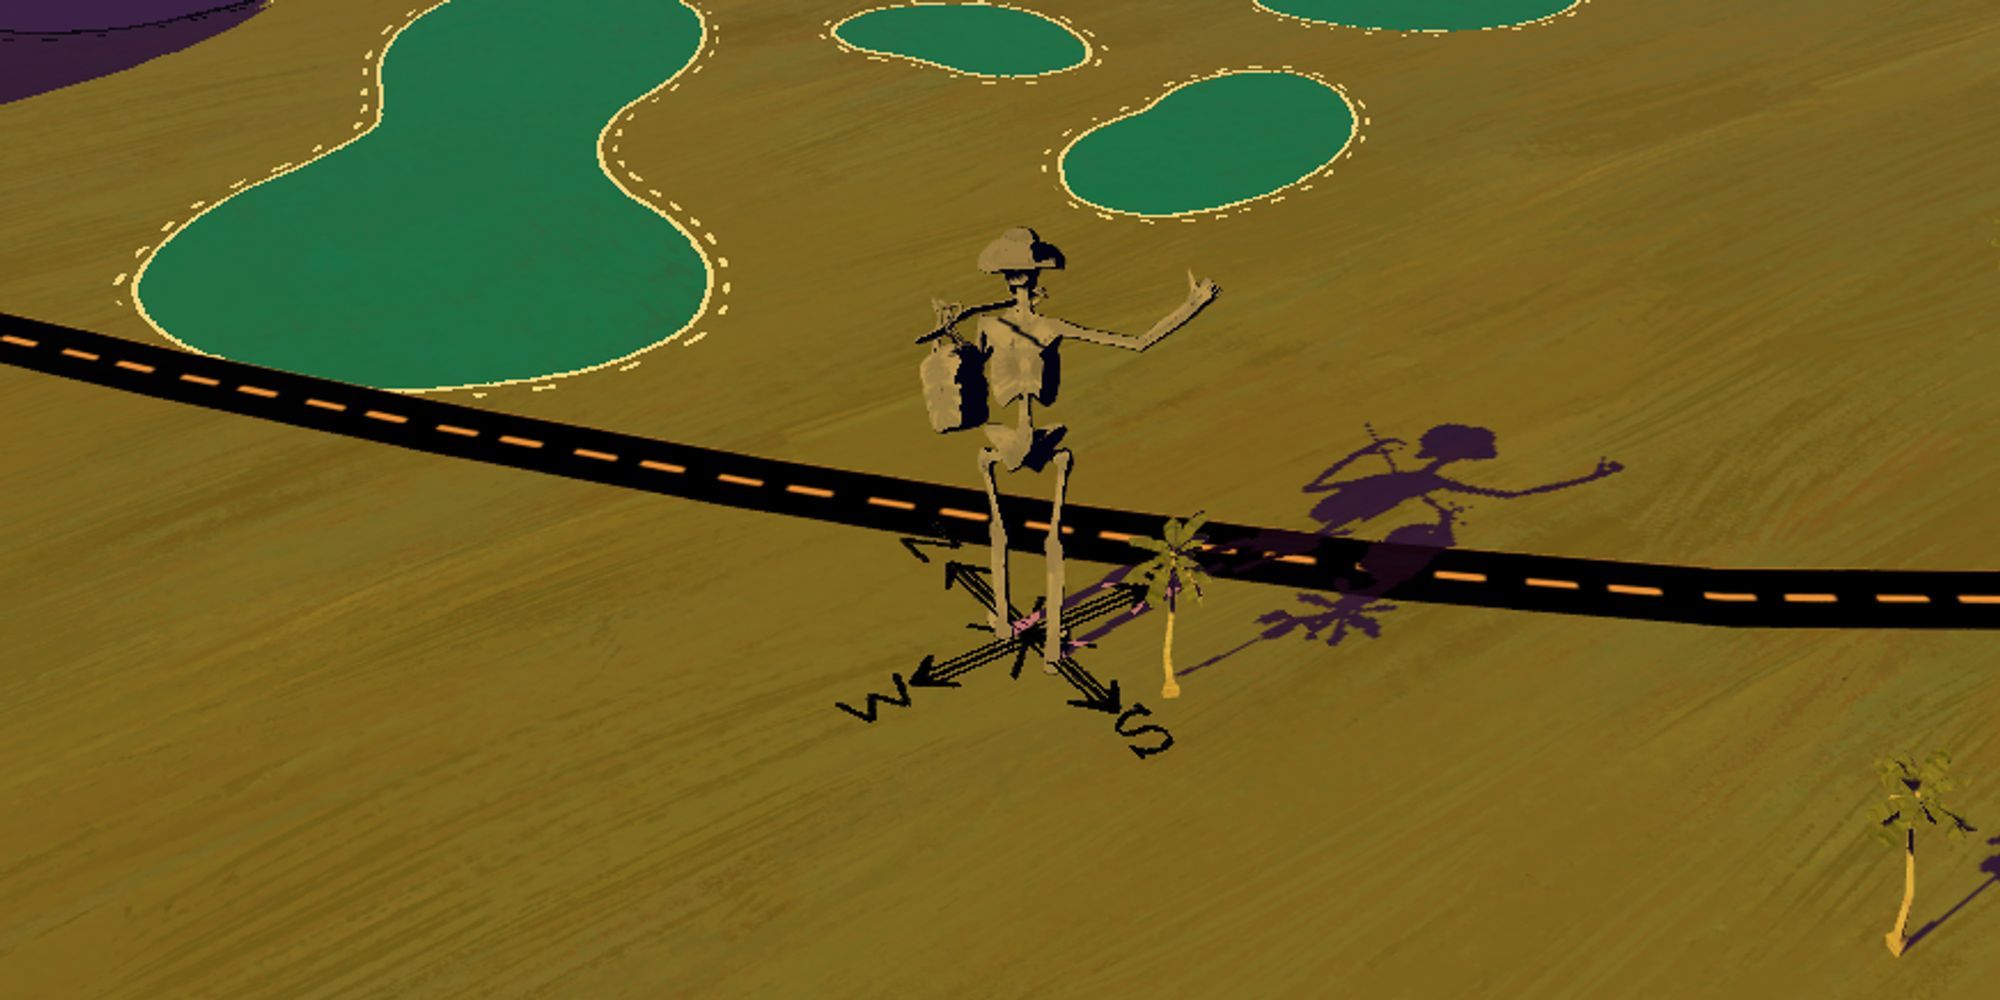 Skeleton hitching a ride next to a road